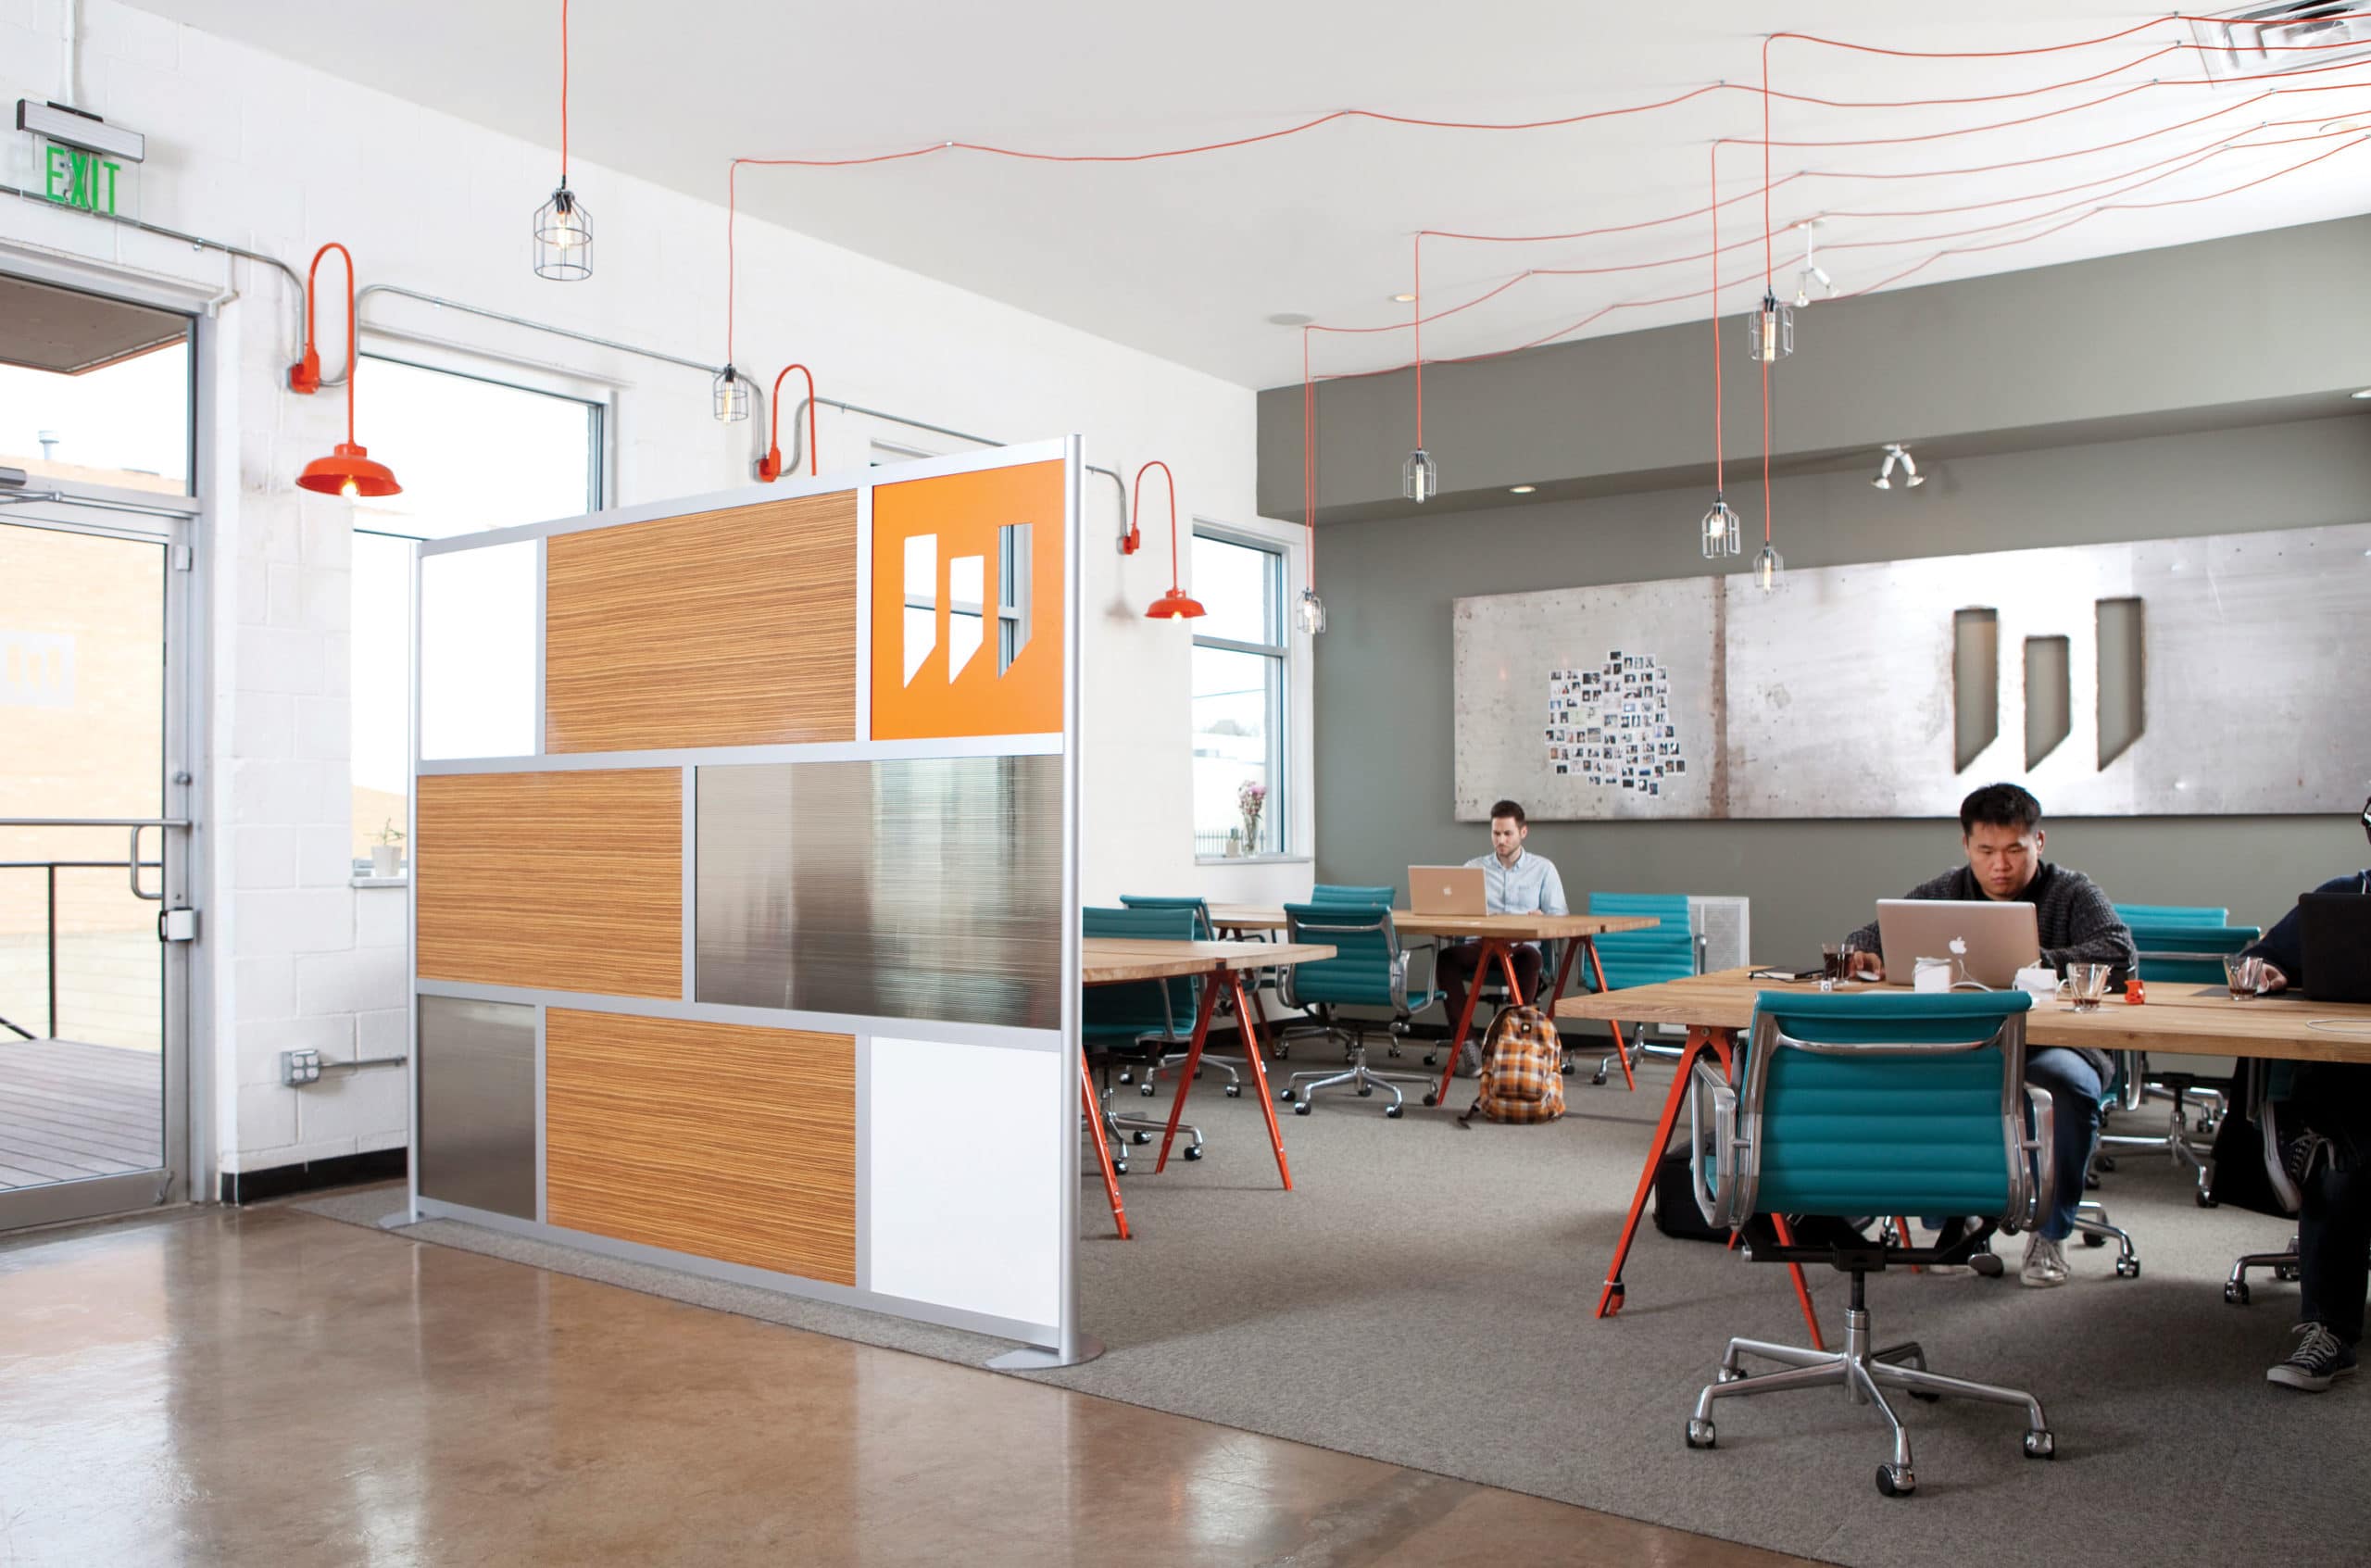 LOFTwall Brings Inspiration Back to the Workplace